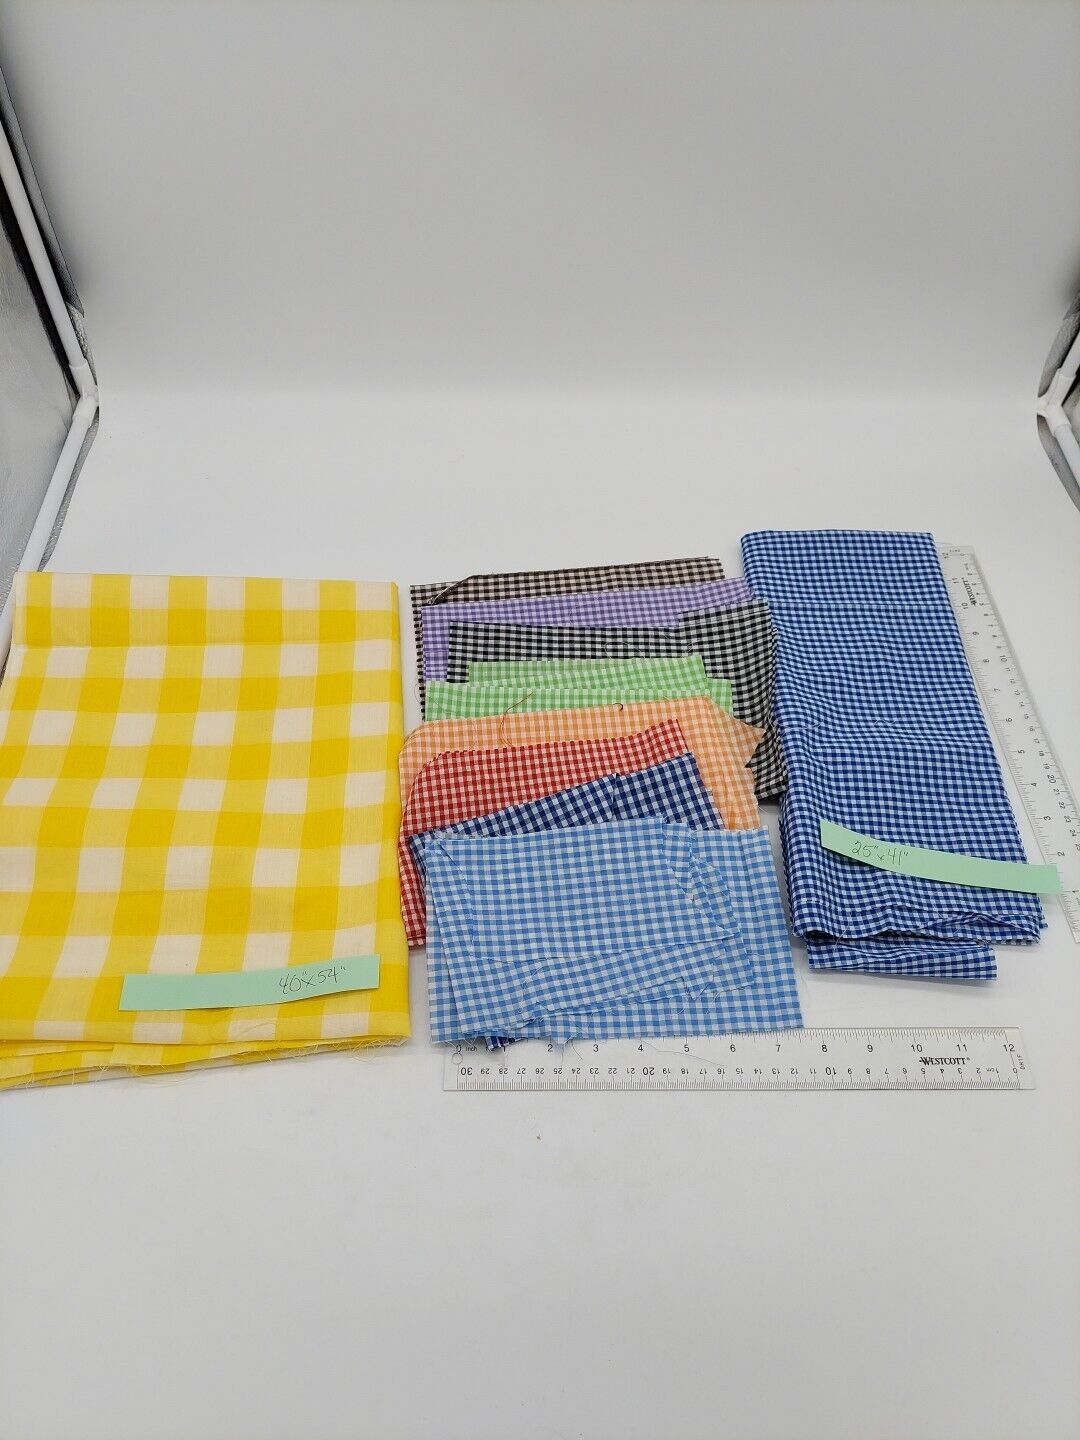 Lot 1970s Gingham Cotton Poly Small Check Green blue red orange black brown ++++